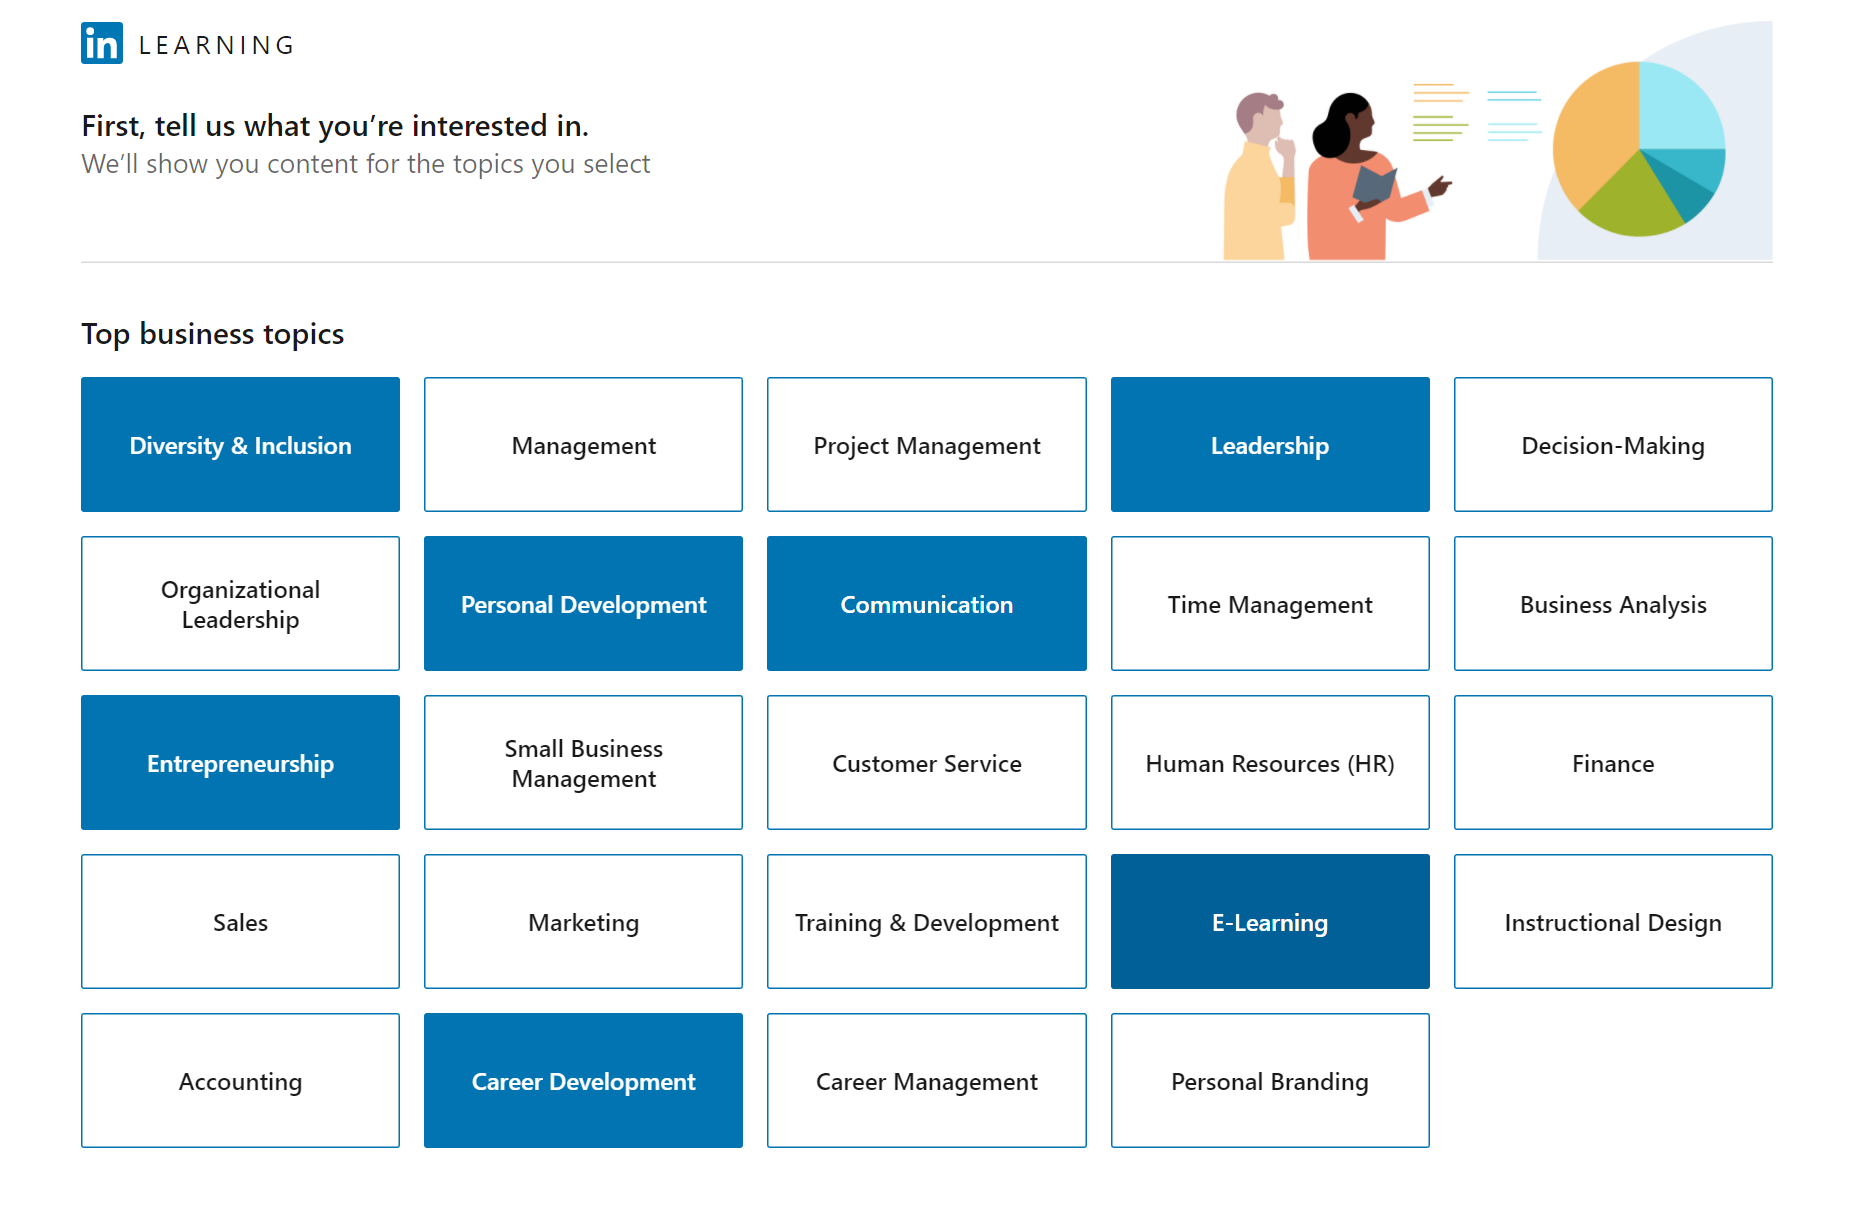 LinkedIn Learning for Library grants you access to all of LinkedIn's professional resources.